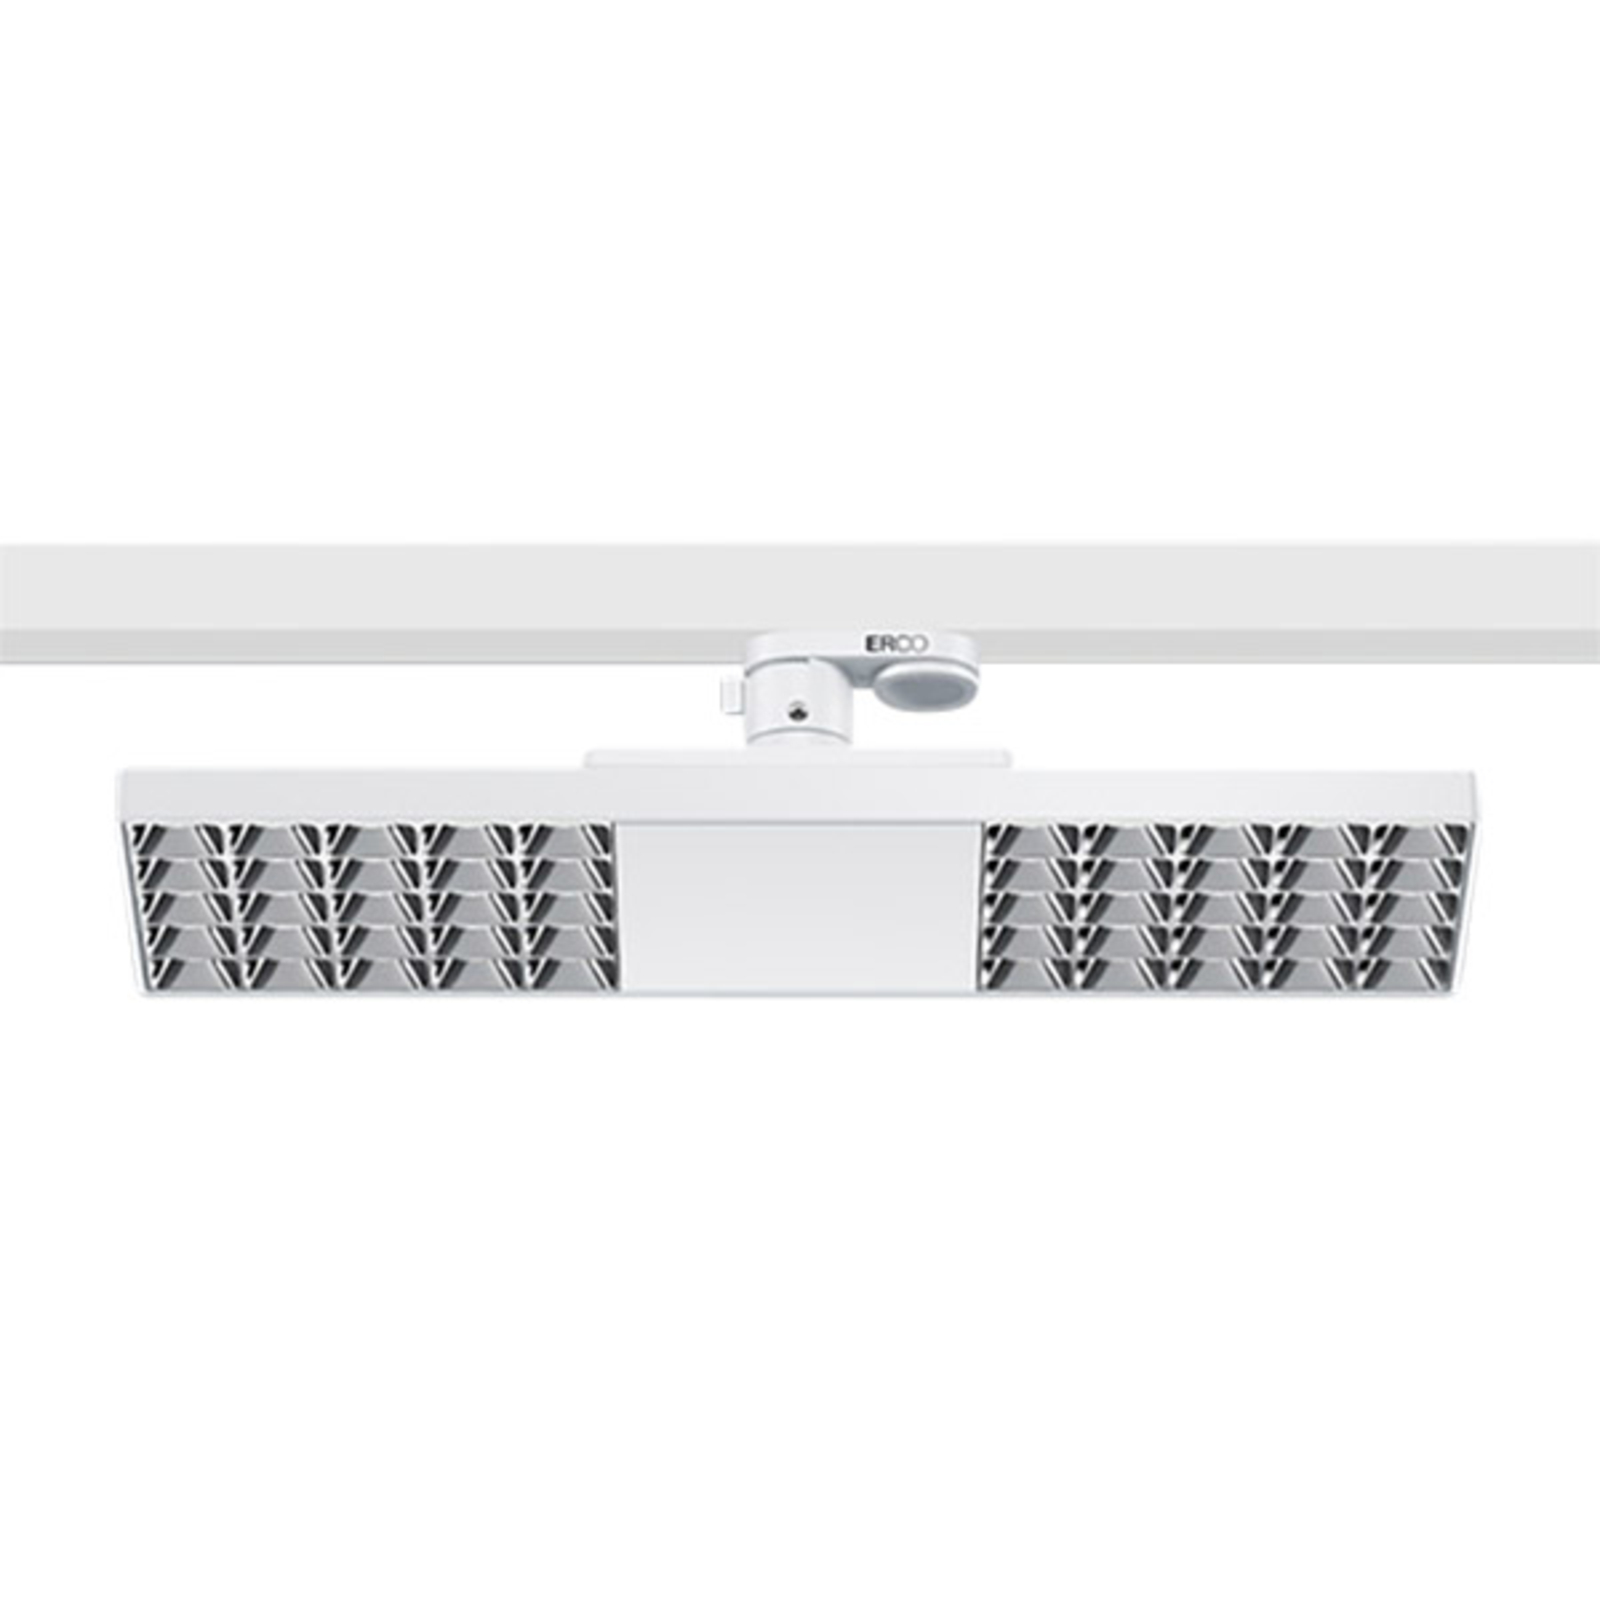 ERCO Jilly 230V 15W extra wide 830 blanc/argent